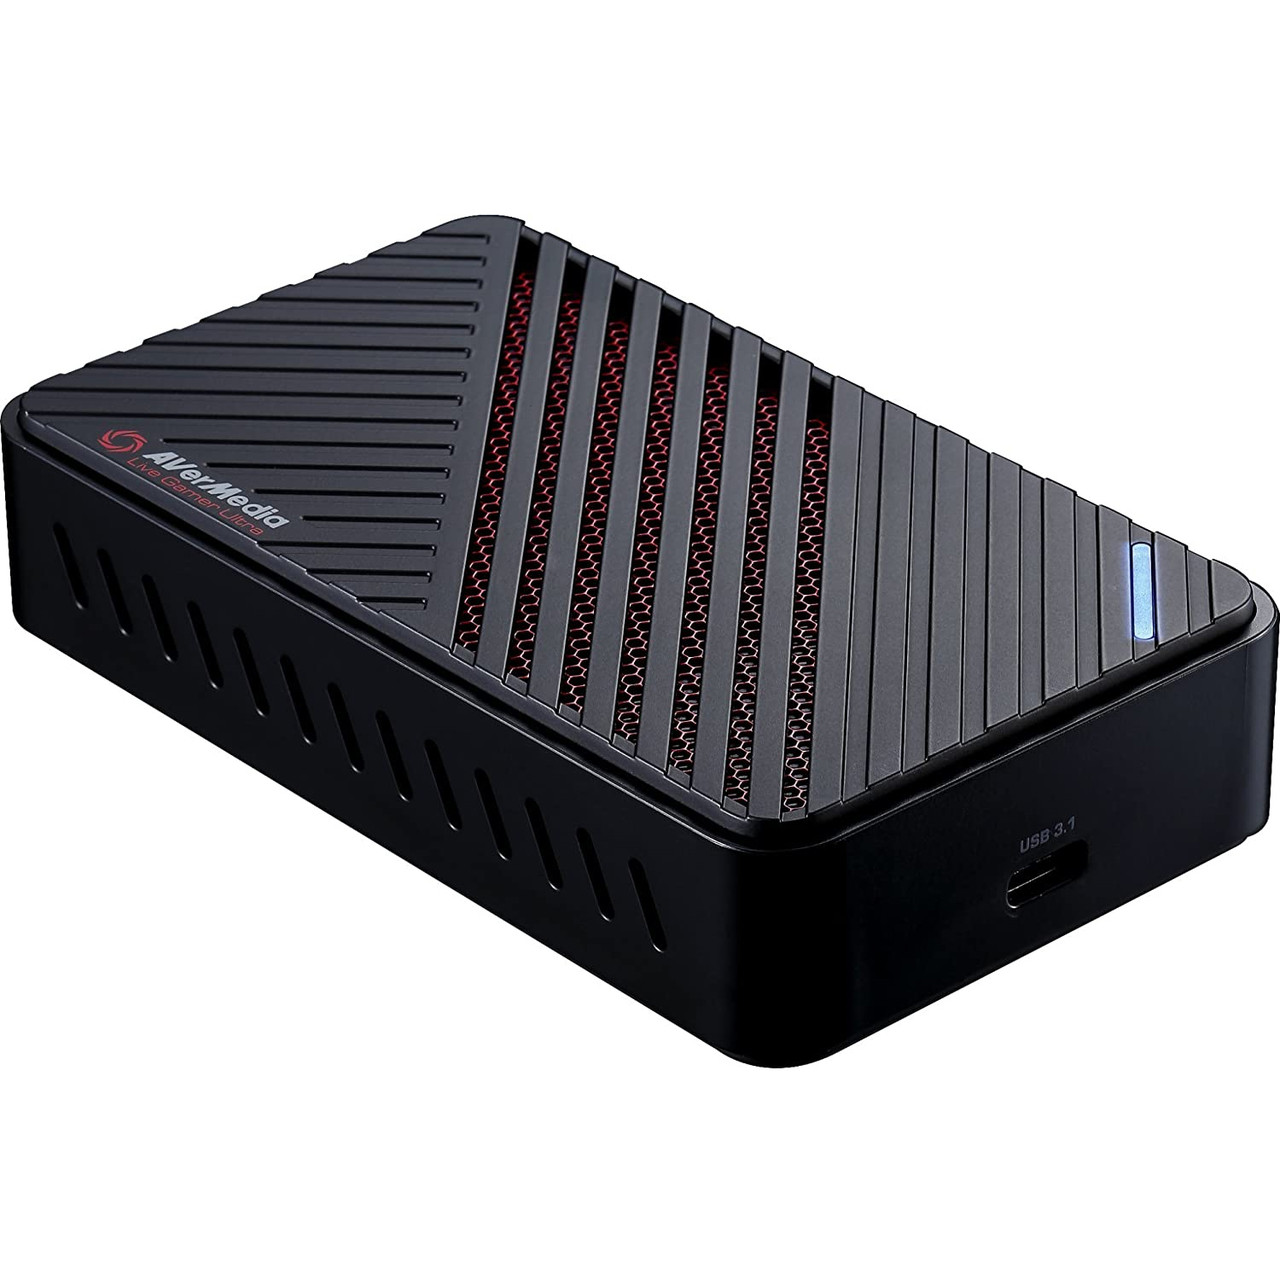 AVerMedia Live Gamer ULTRA 4Kp60 HDR Pass-Through, 4Kp30 Capture Card, Ultra-Low Latency for Broadcasting and Recording PS4 Pro and Xbox One X, USB 3.1 (GC553)